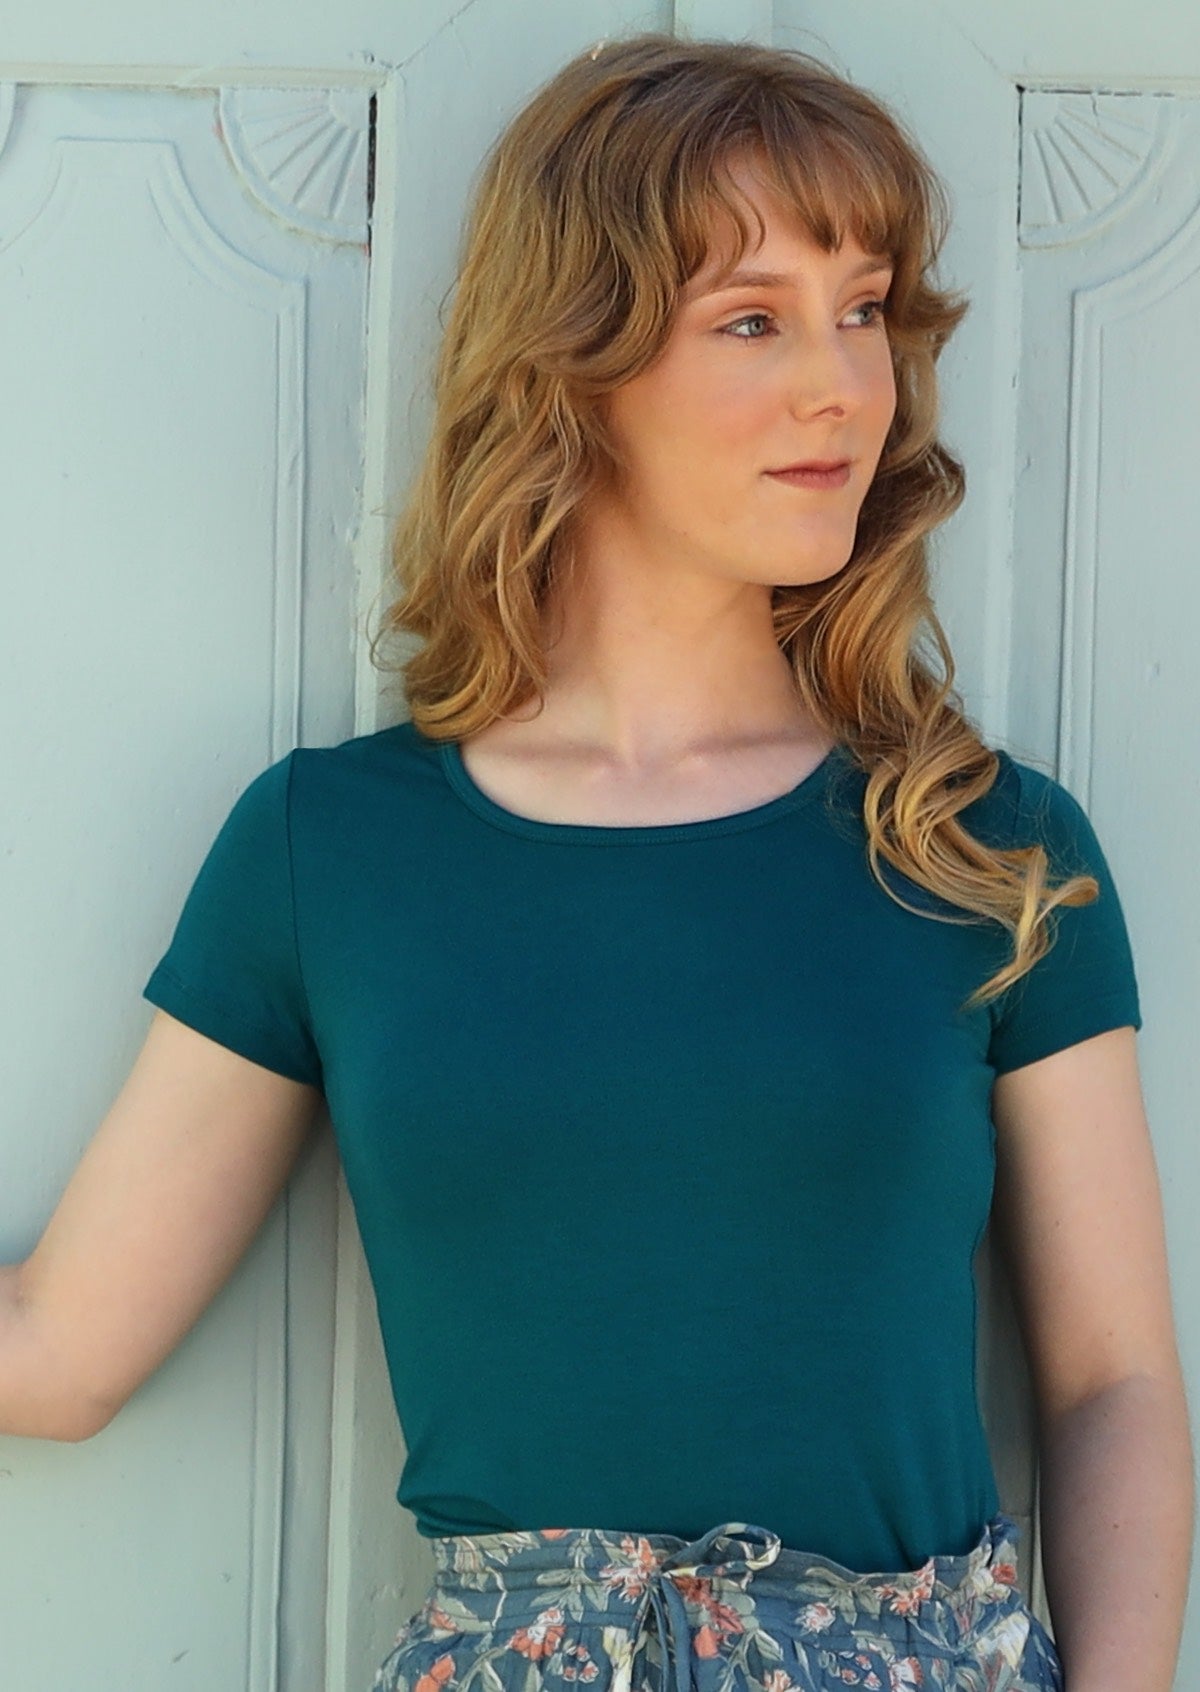 Woman wearing a scoop neck teal rayon fitted t-shirt with green floral pants.